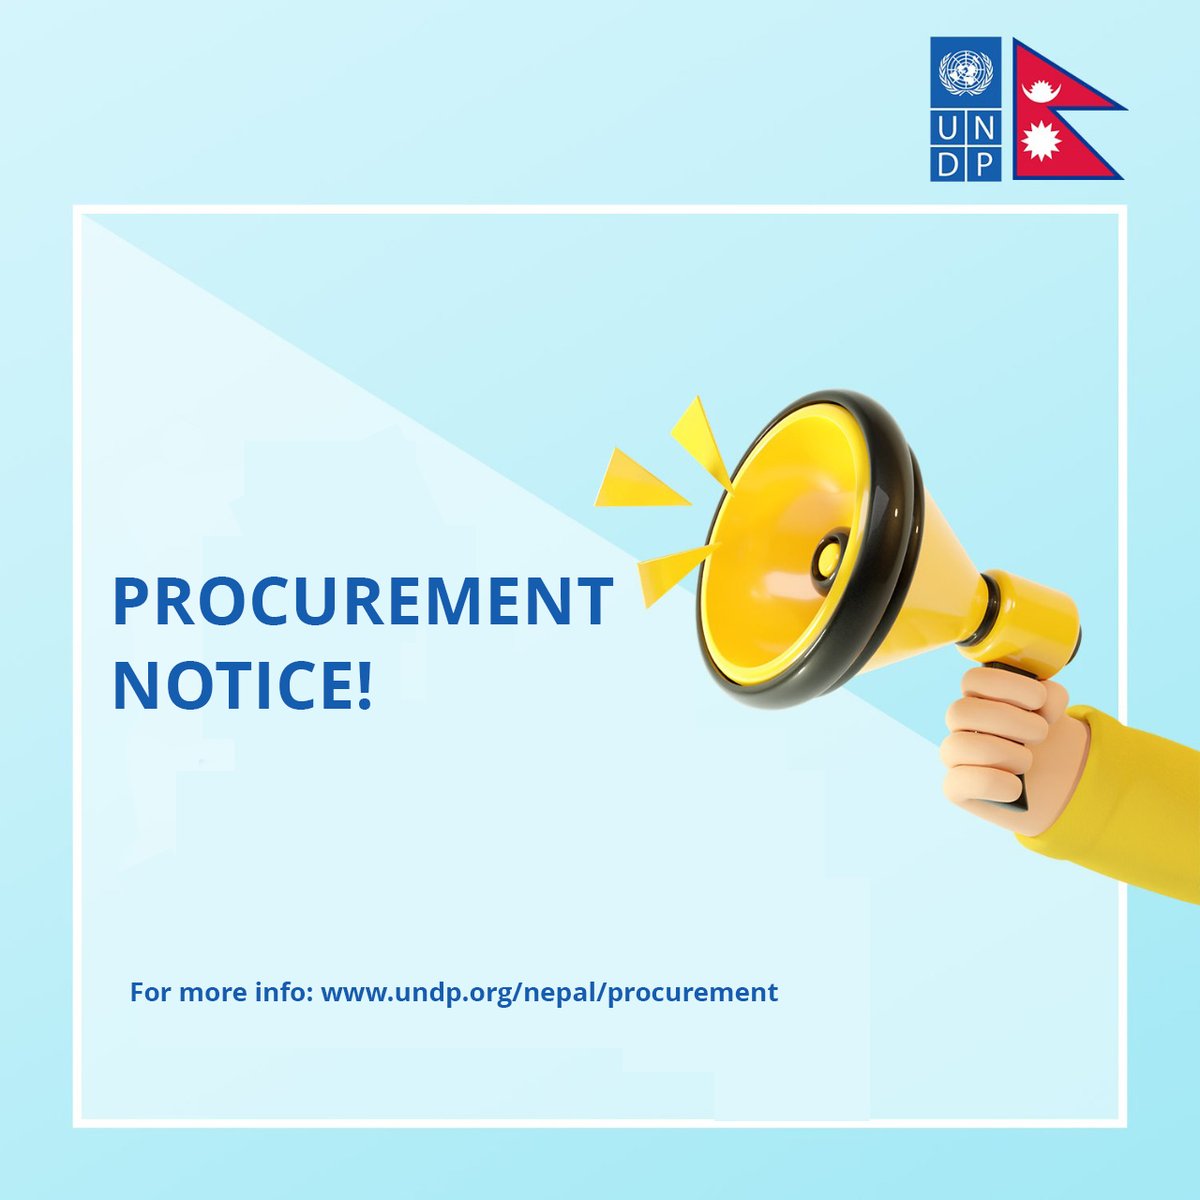 UNDP Nepal is seeking a Gender Equality and Social Inclusion (GESI) expert to support project/programme evaluations. For more information👉: shorturl.at/ekAJ8